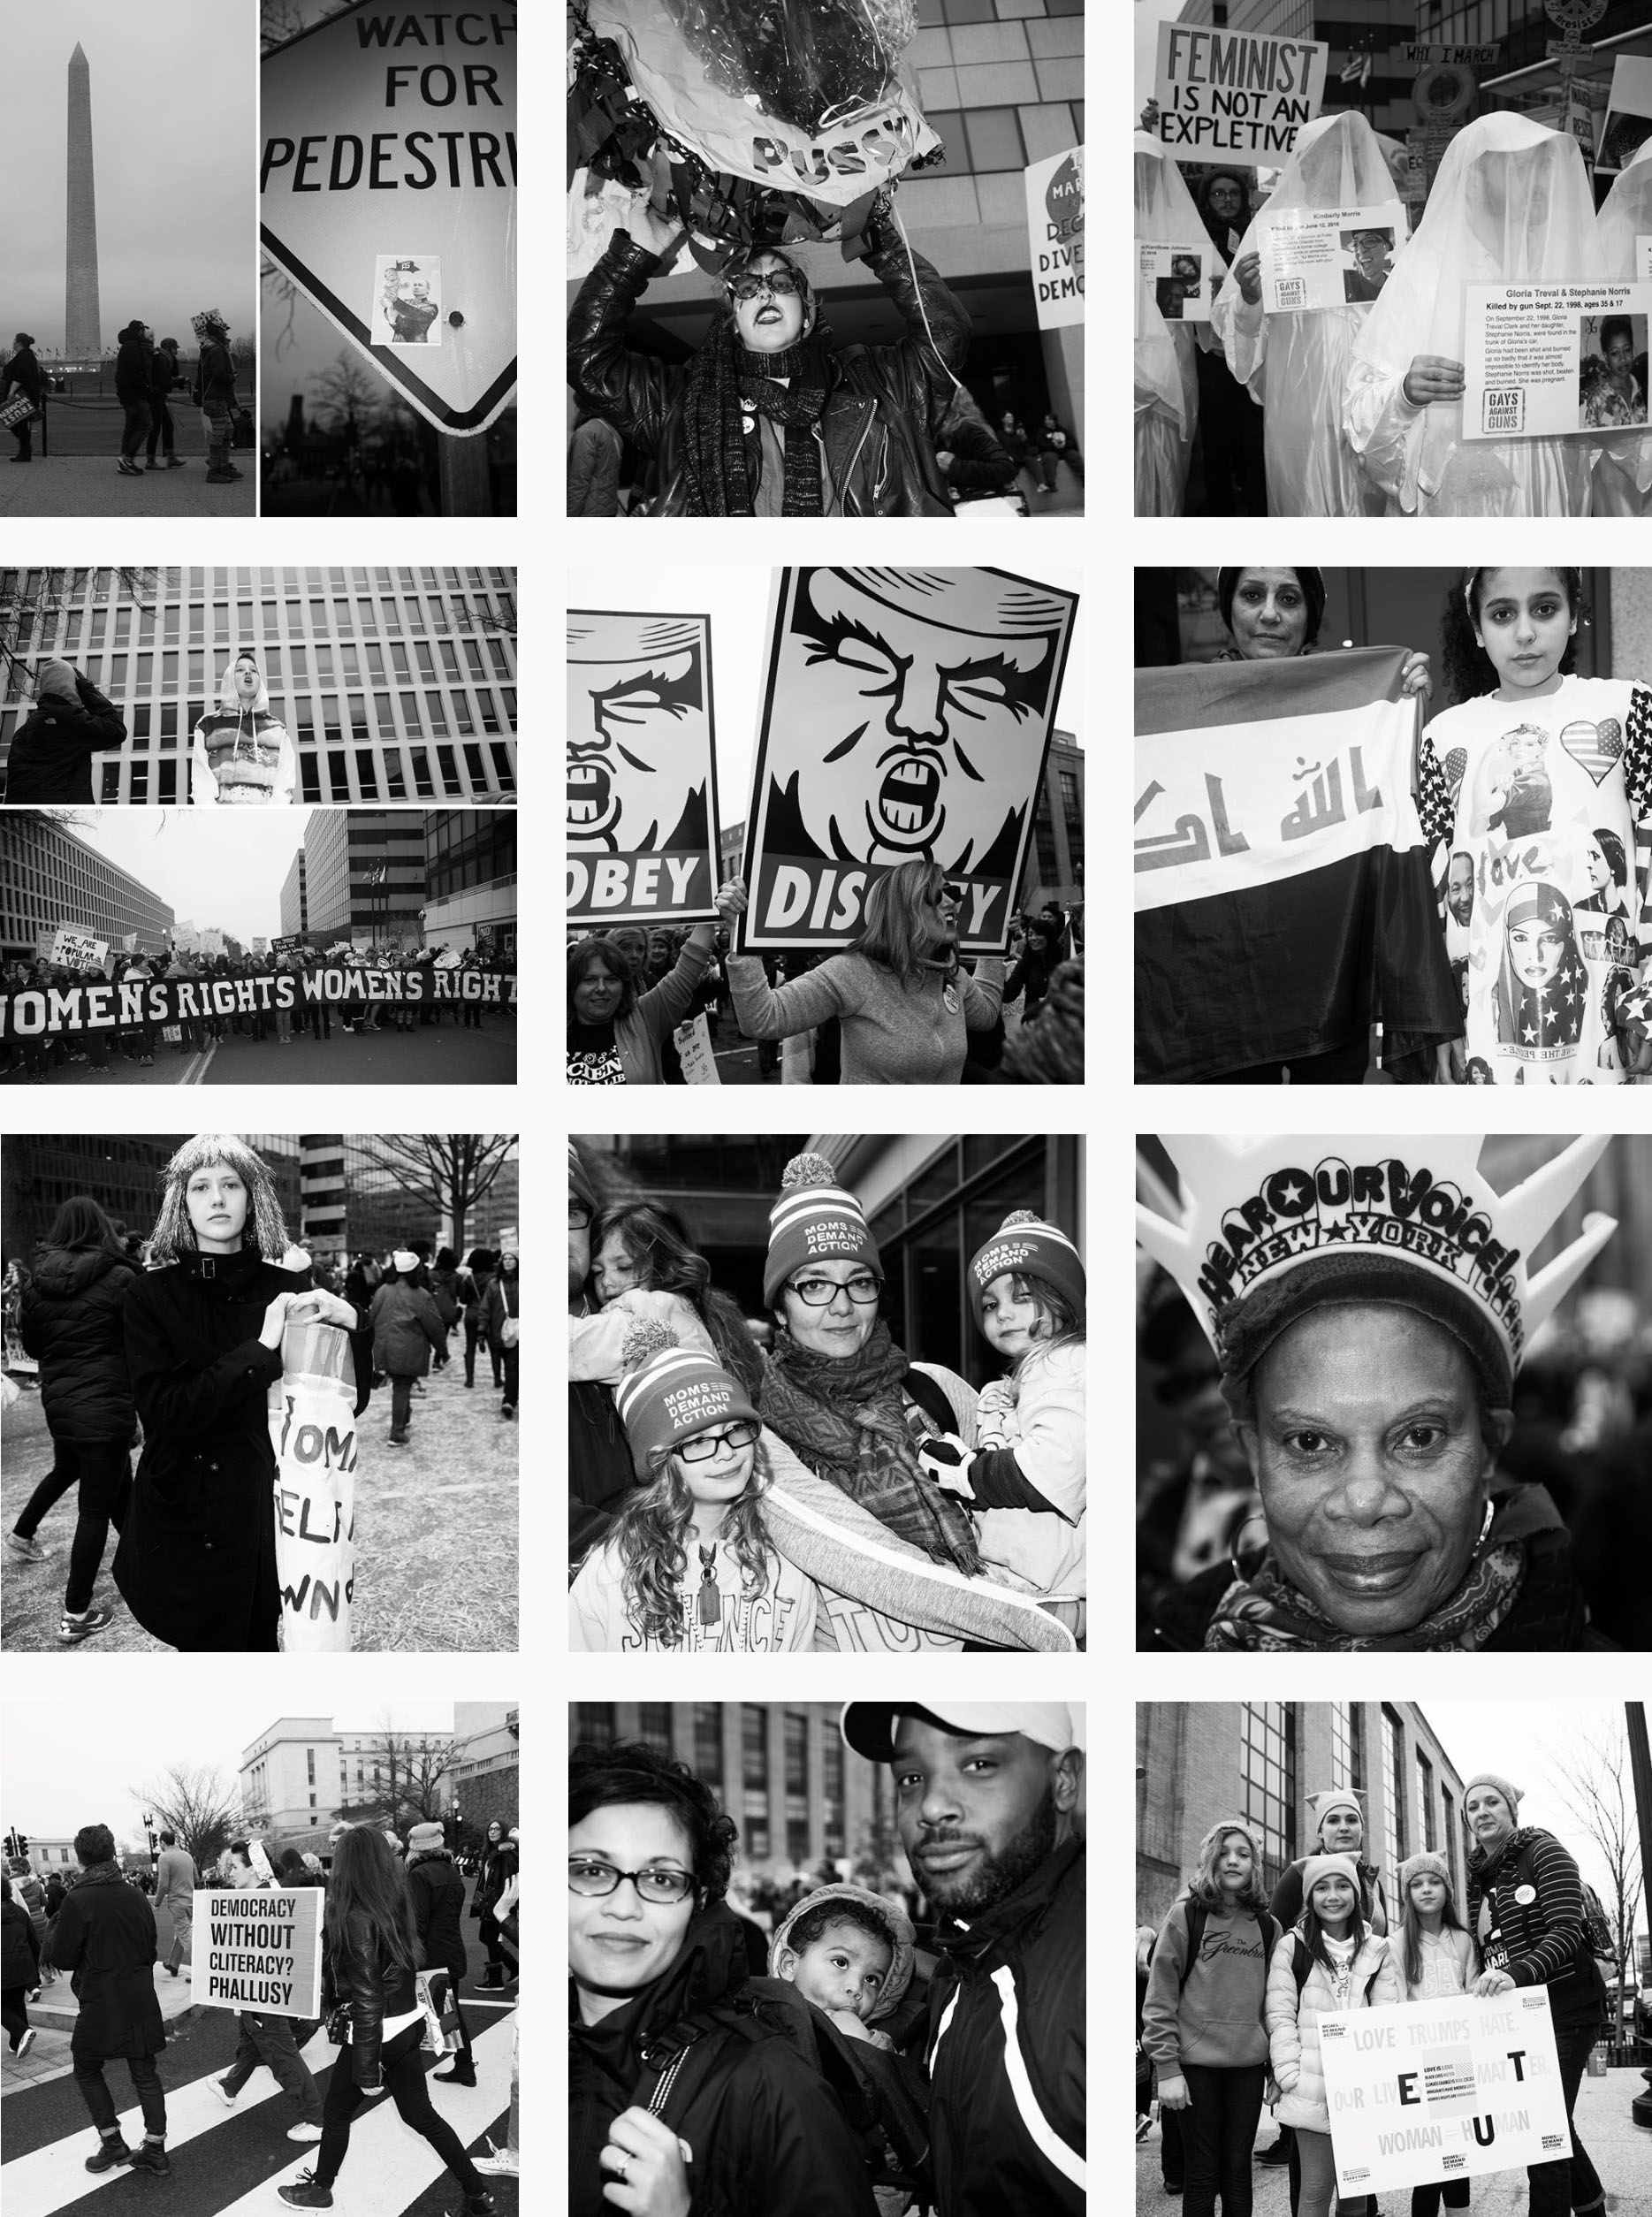  “ #WomensMarchOnWashington Live Coverage .”   Photos &amp; Reporting:   Lili Holzer-Glier   Role:  Assignment, Instagram and website coordinator, sequence, text. 